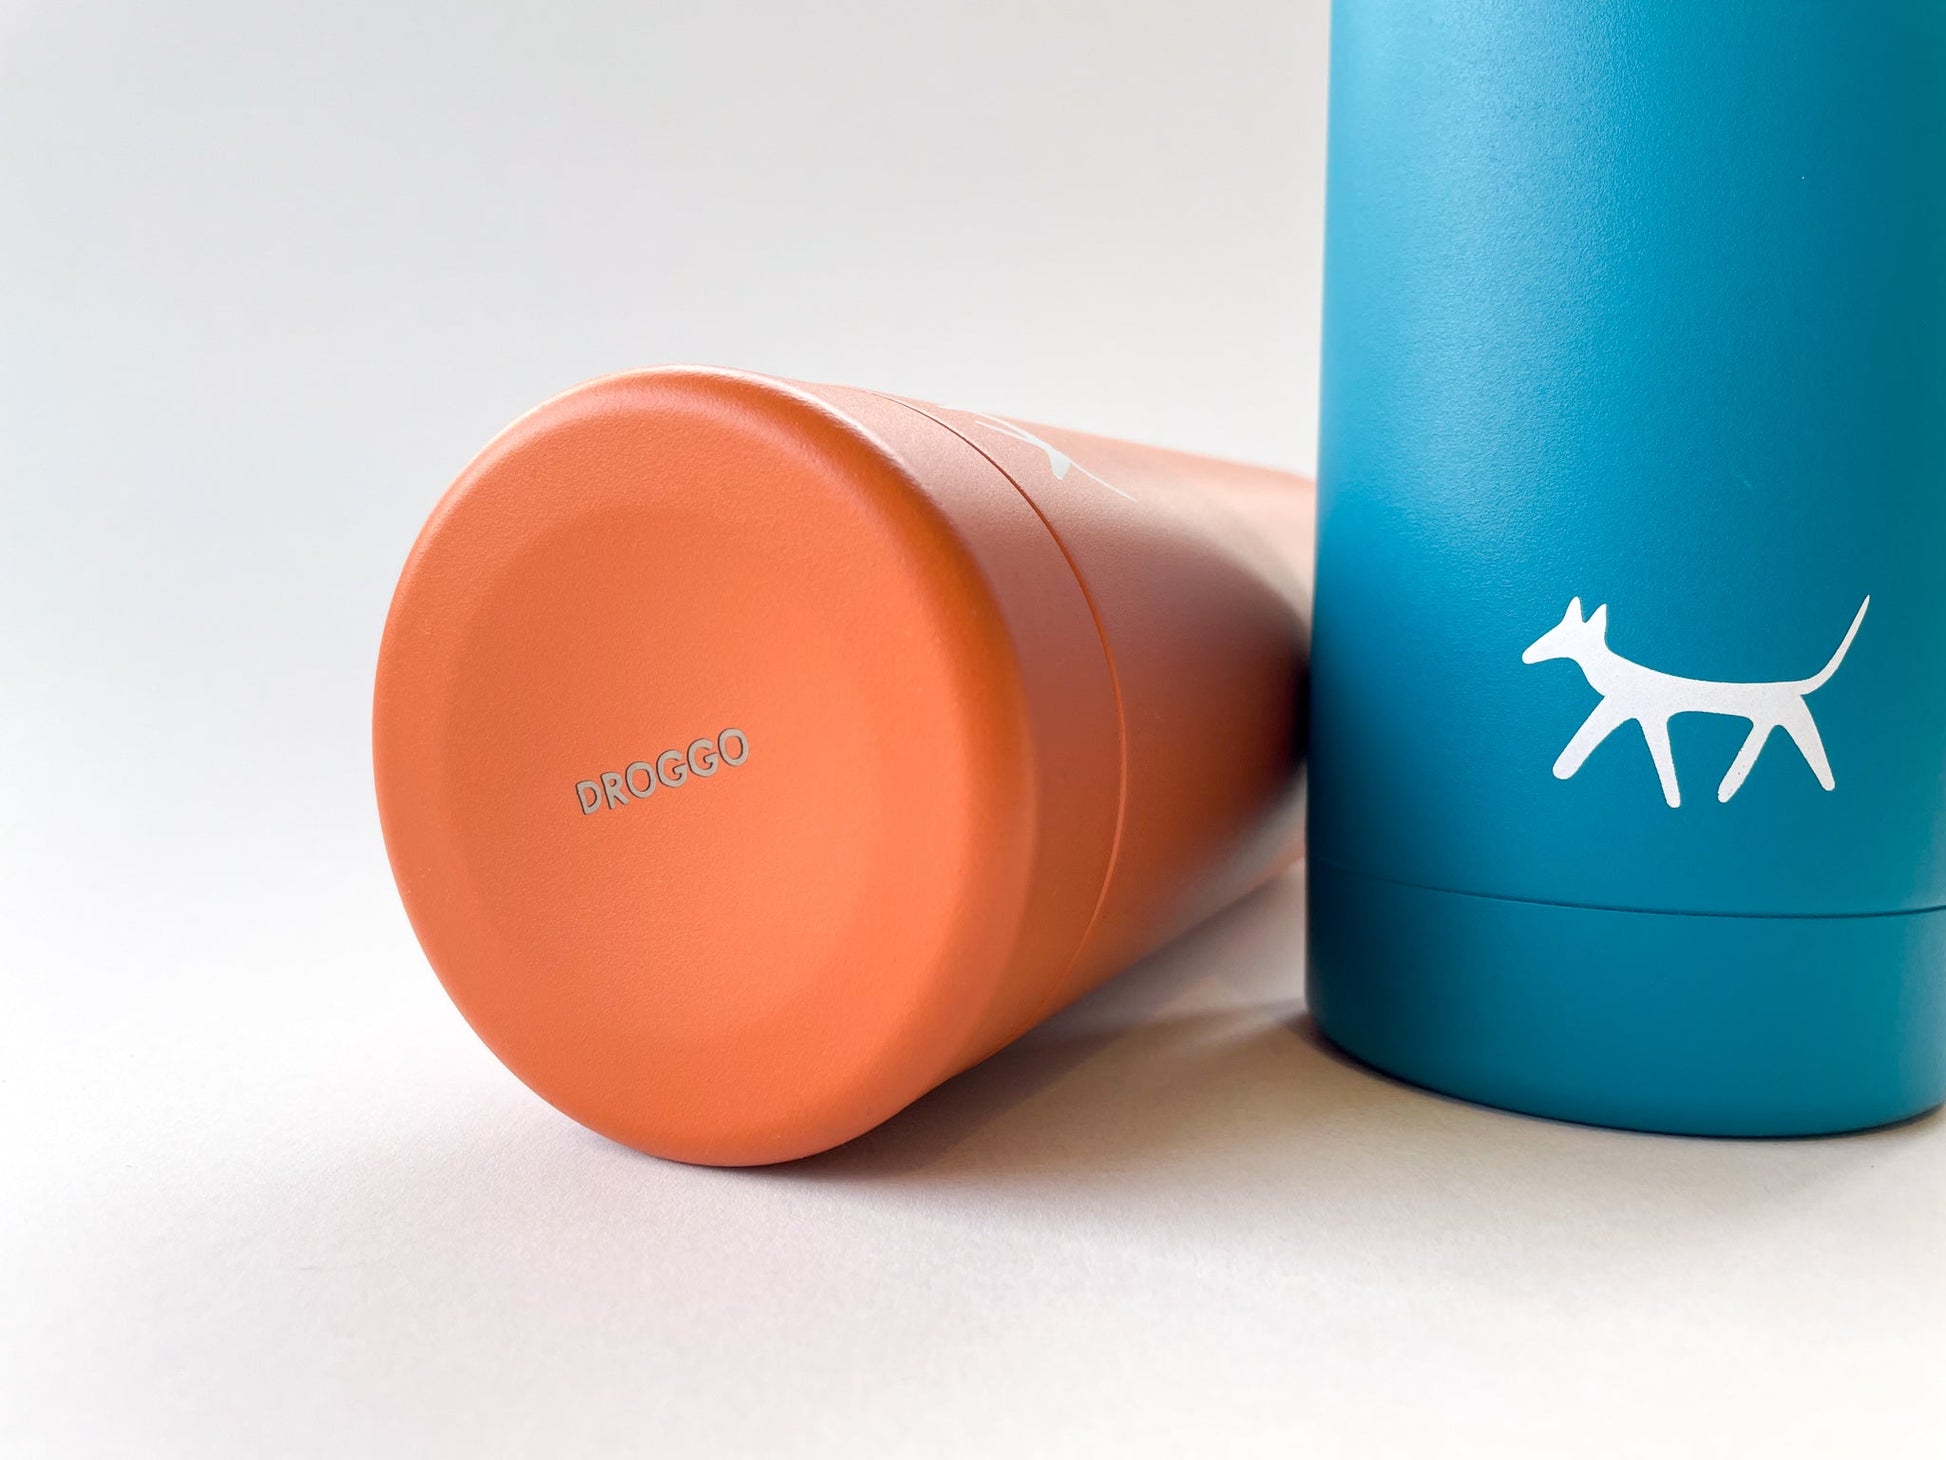 Detail of the Droggo logos at the bottom of the rust water bottle and at the front of the lake water bottle. White background.